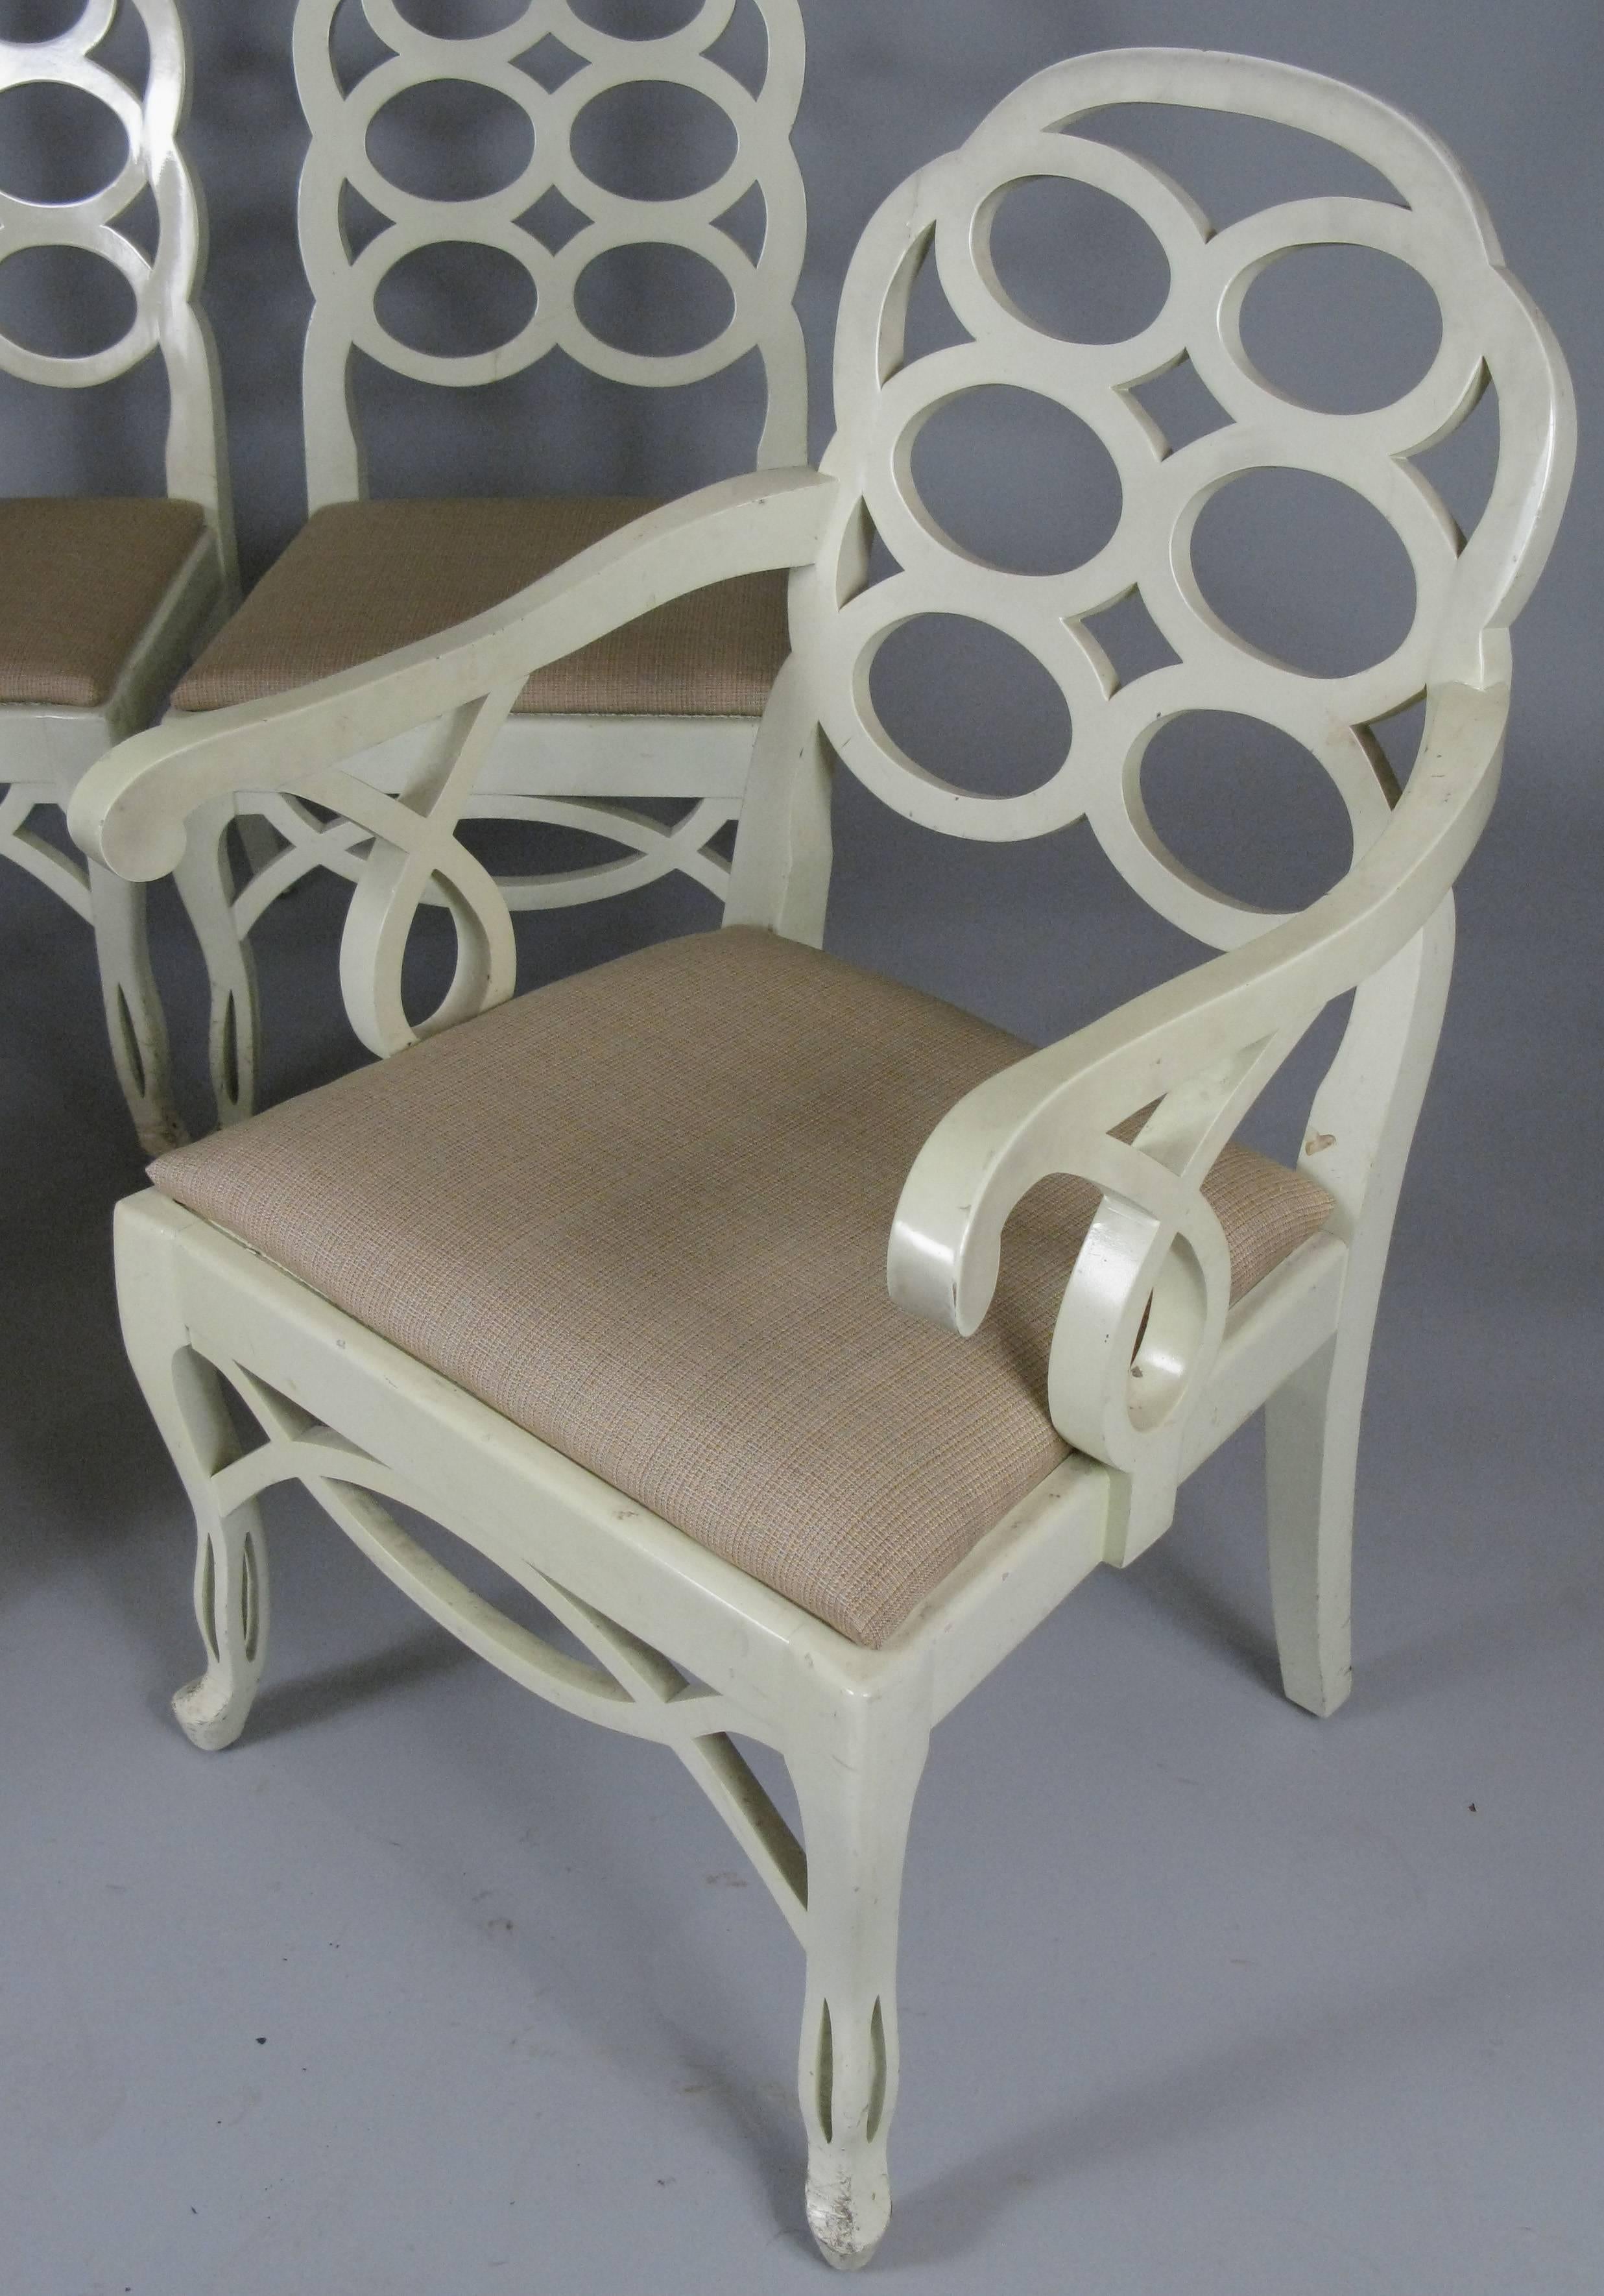 A matched set of four of Frances Elkins iconic Loop dining chairs, with a pair of armchairs and a pair of side chairs. All with the original caned seat under an upholstered seat cover. The original ivory lacquer finish is in fair condition, with